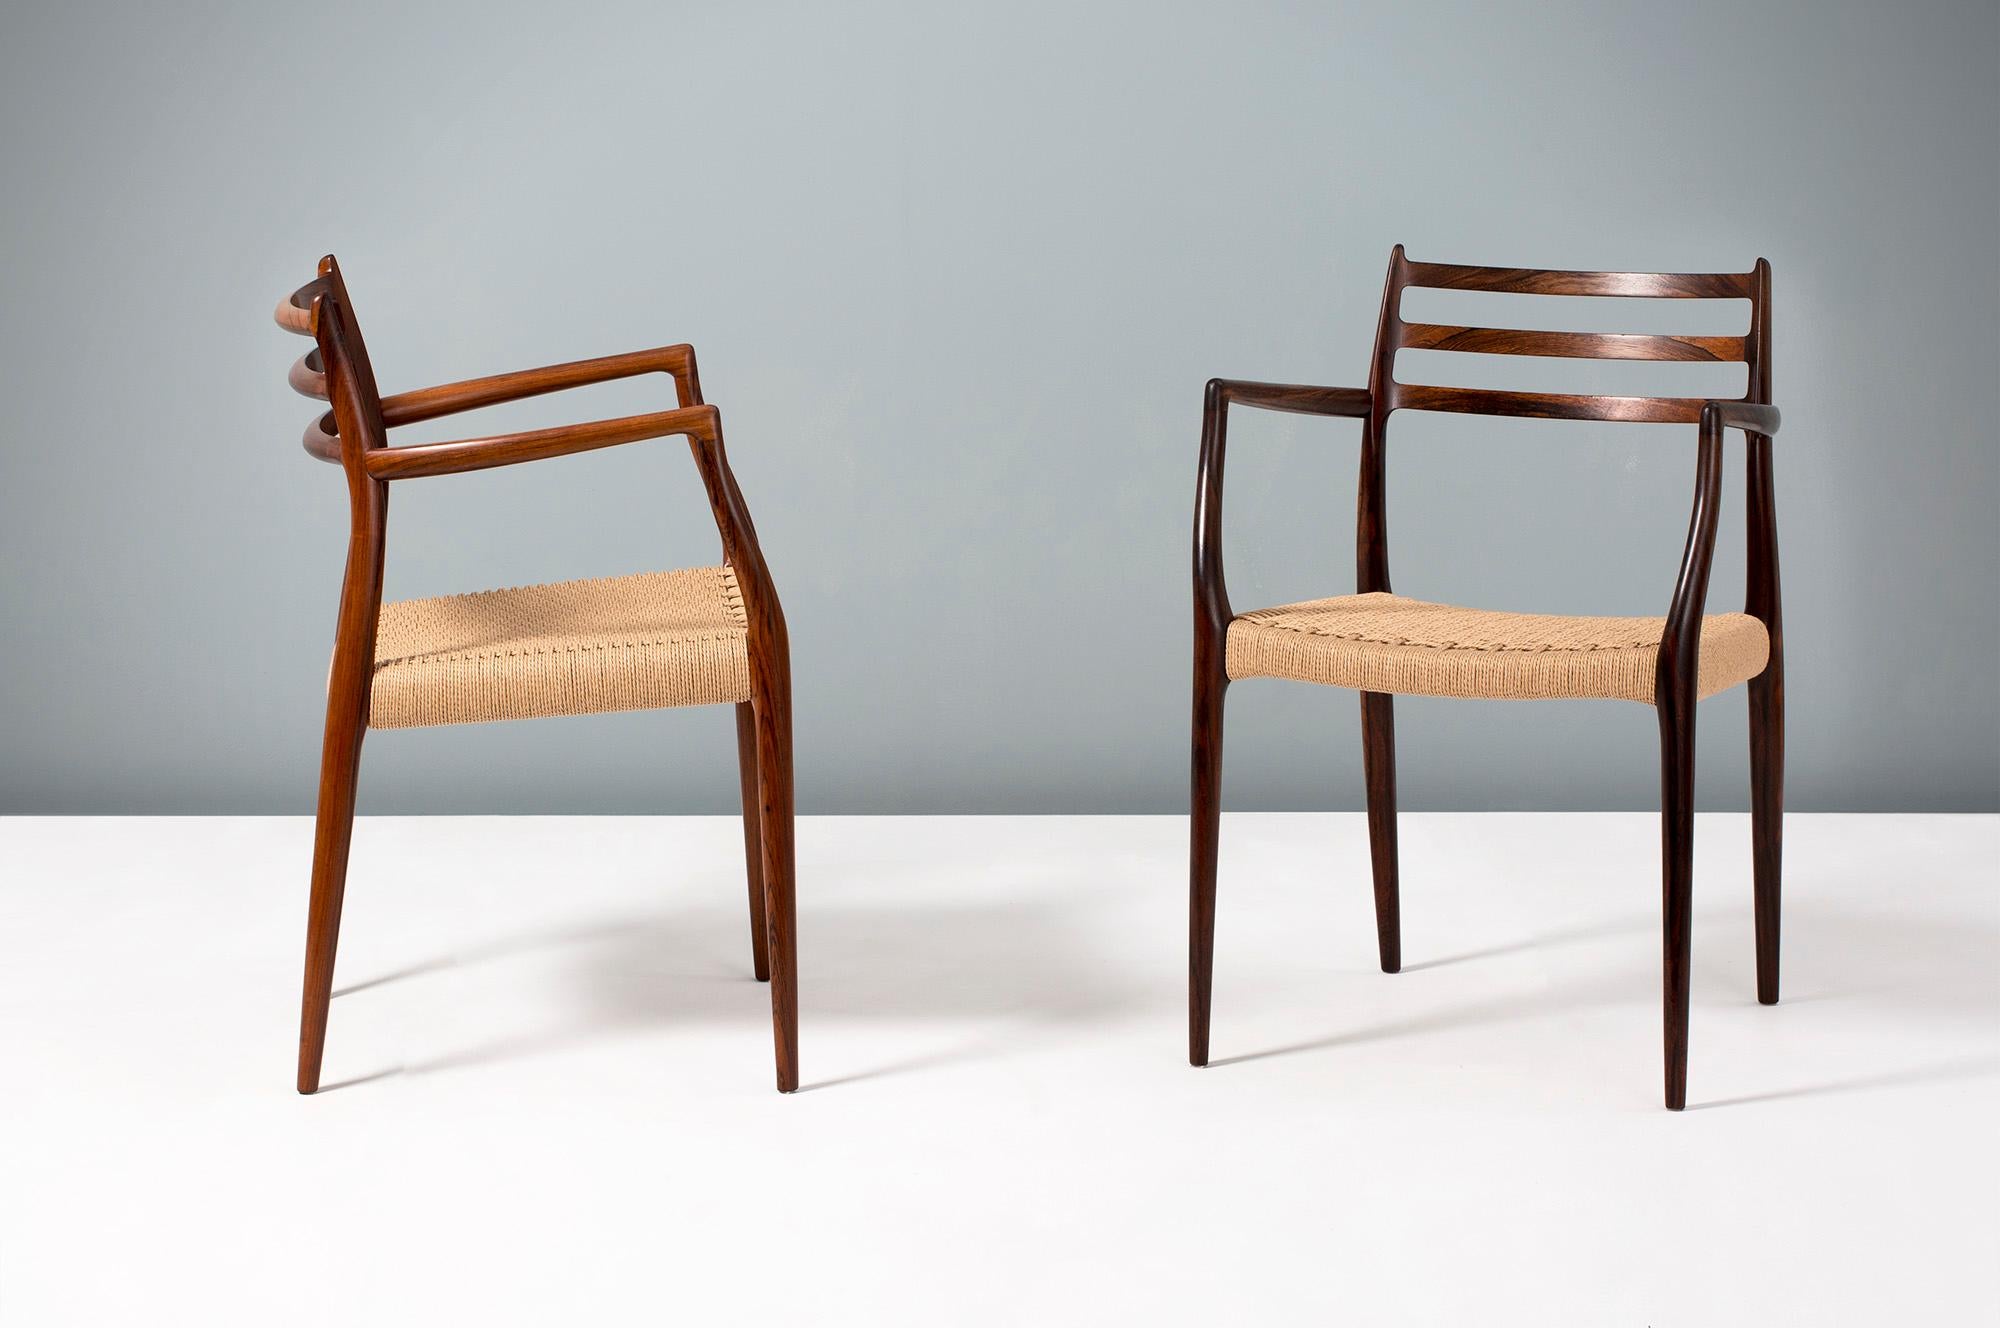 Niels Moller

Pair of Model 62 Armchairs, 1962.

Rarely seen edition of this iconic design made from exquisite, highly figured Brazilian Rosewood. Designed by Niels Moller for his own company: J.L. Moller Mobelfabrik in Denmark, 1962. These